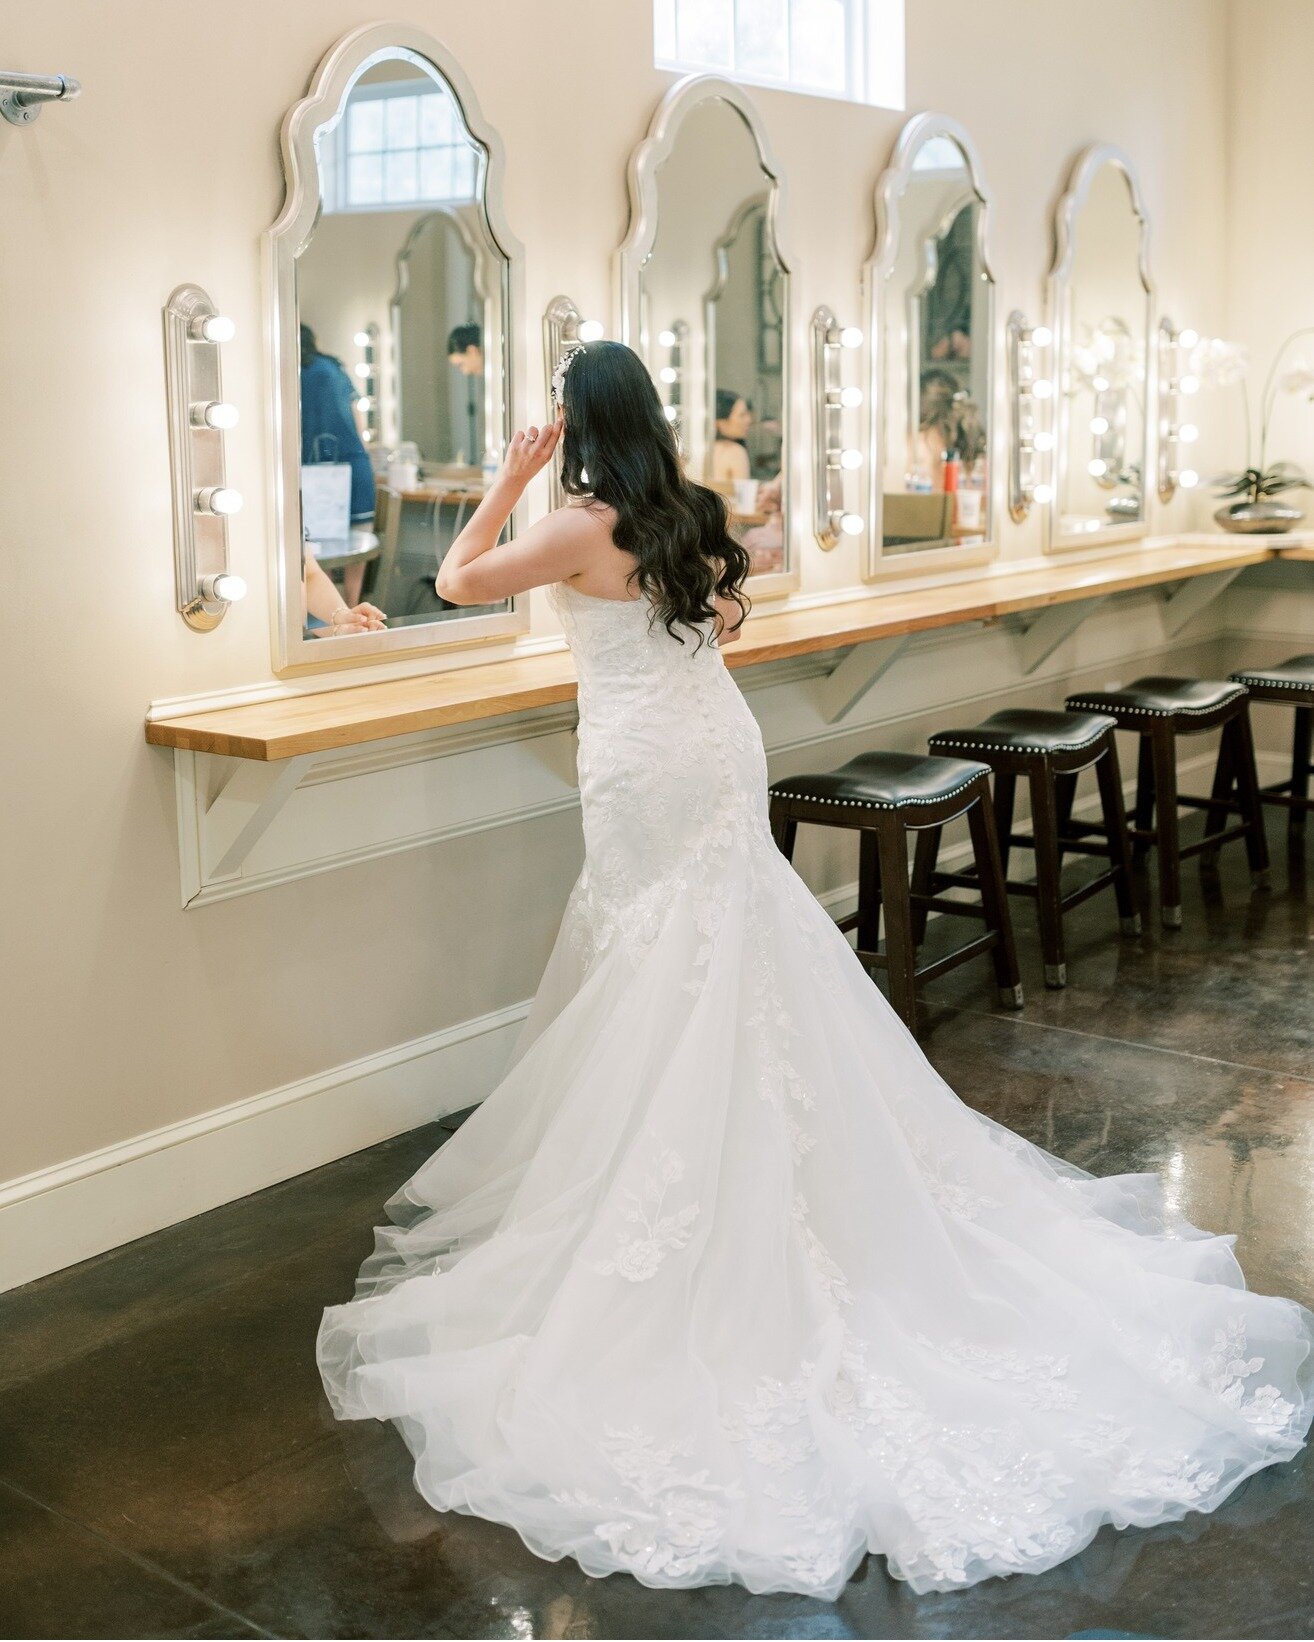 Perfection! The Bowing Oaks bridal suite gives you (and your dress) plenty of space to spread out and enjoy some pre-wedding pampering.

📸: @angelita_photo

#bride #weddingday #bridalsuite #bowingoaks #jacksonvillewedding #jacksonvilleweddingvenue